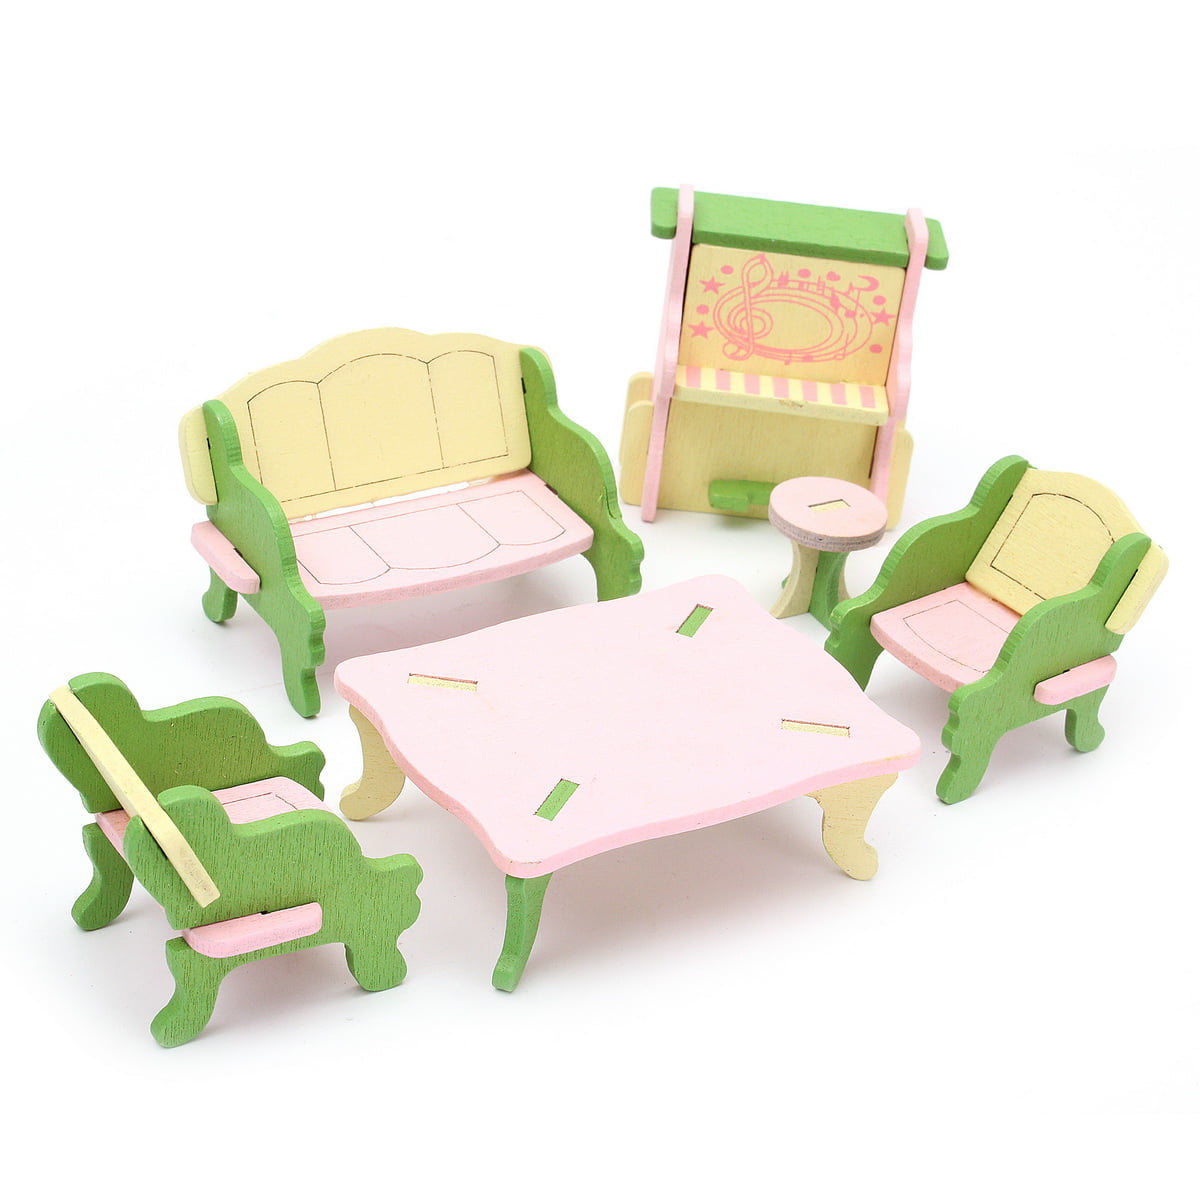 Plastic Dining Table Miniature Kitchen Doll House Furniture Toy Set Gifts Decor 